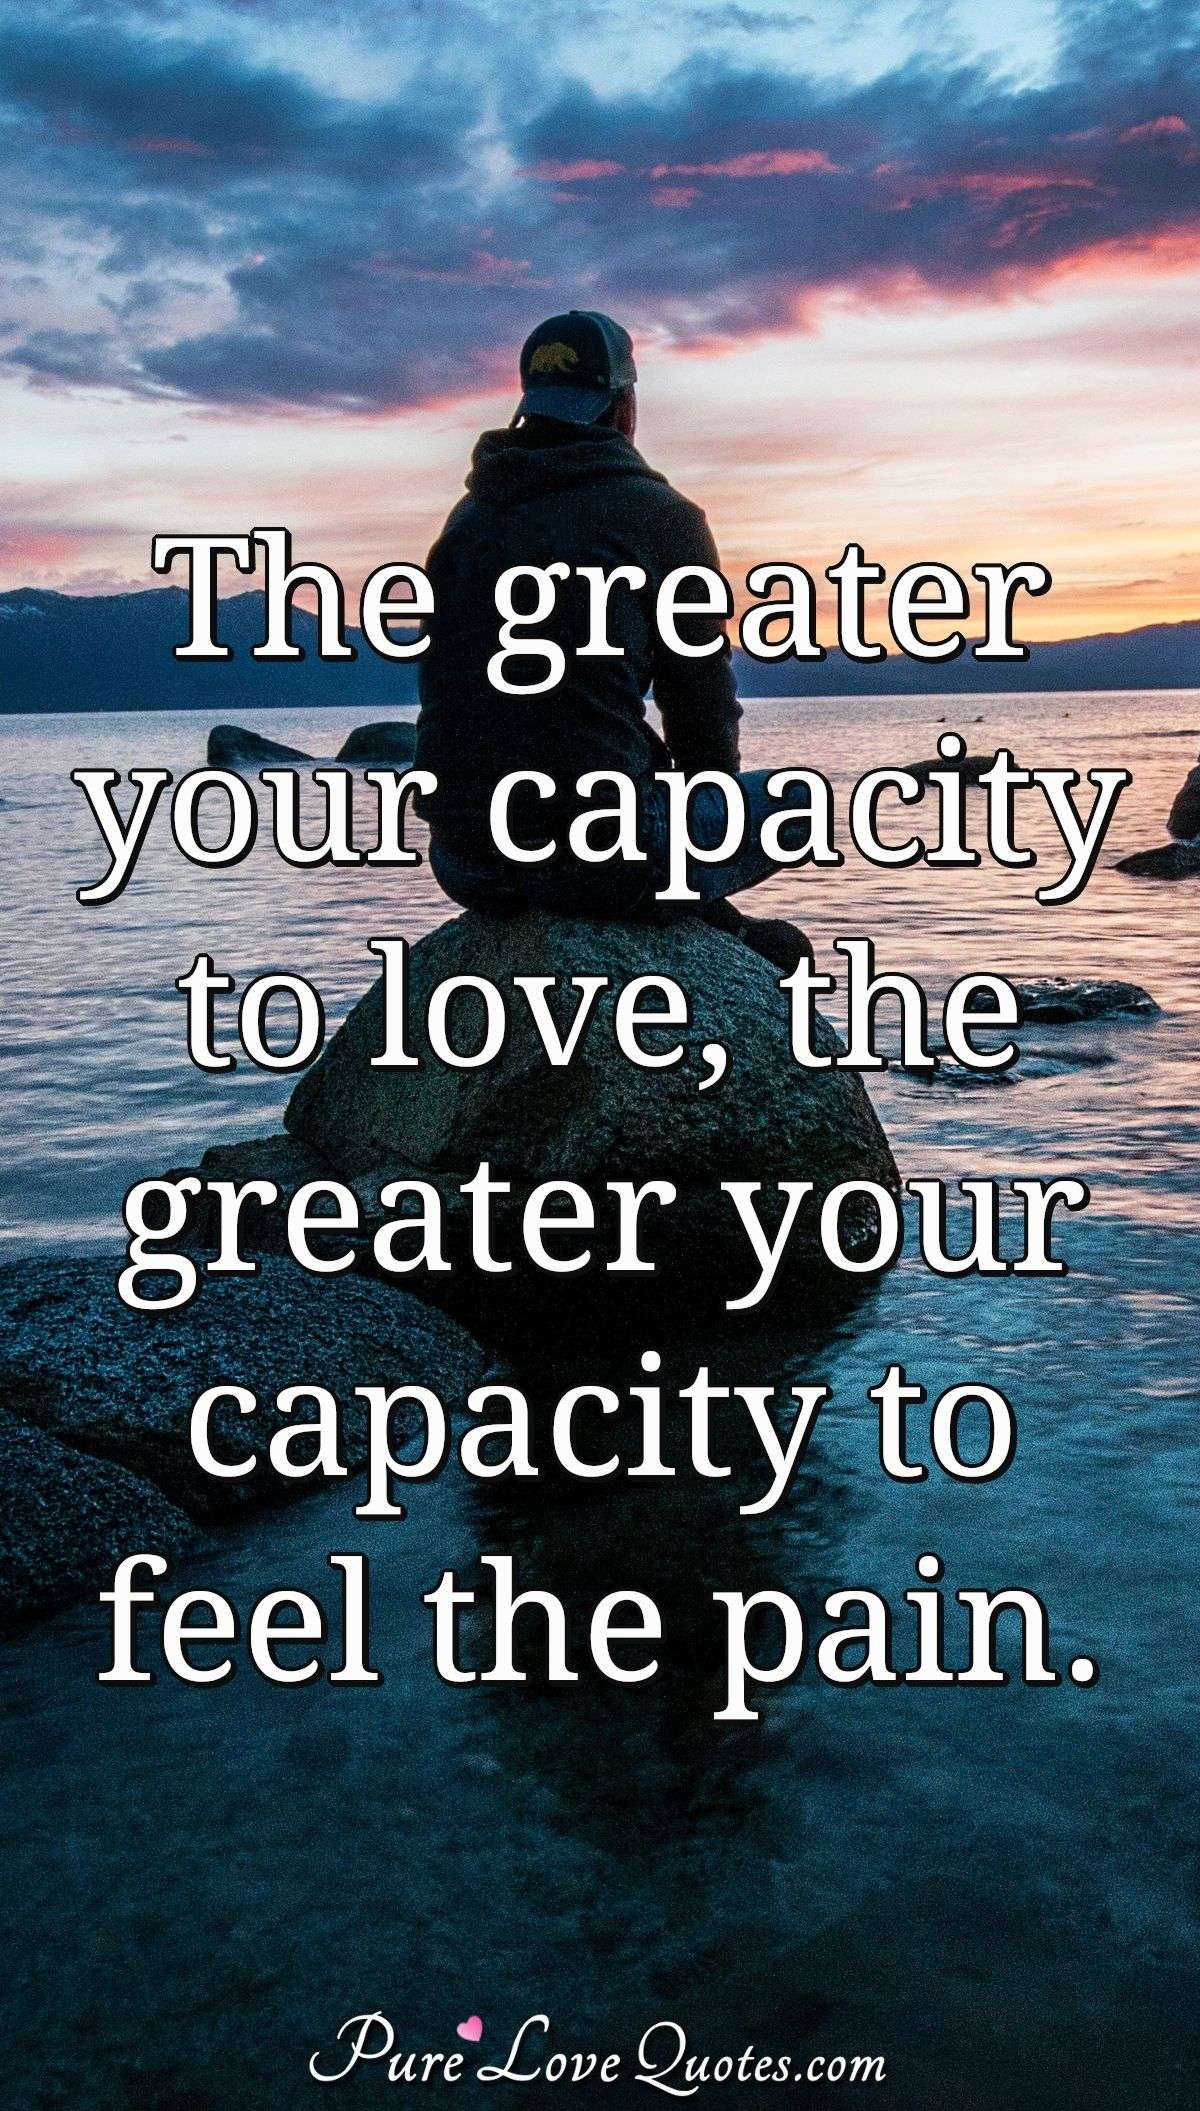 The greater your capacity to love, the greater your capacity to feel the pain. - Anonymous